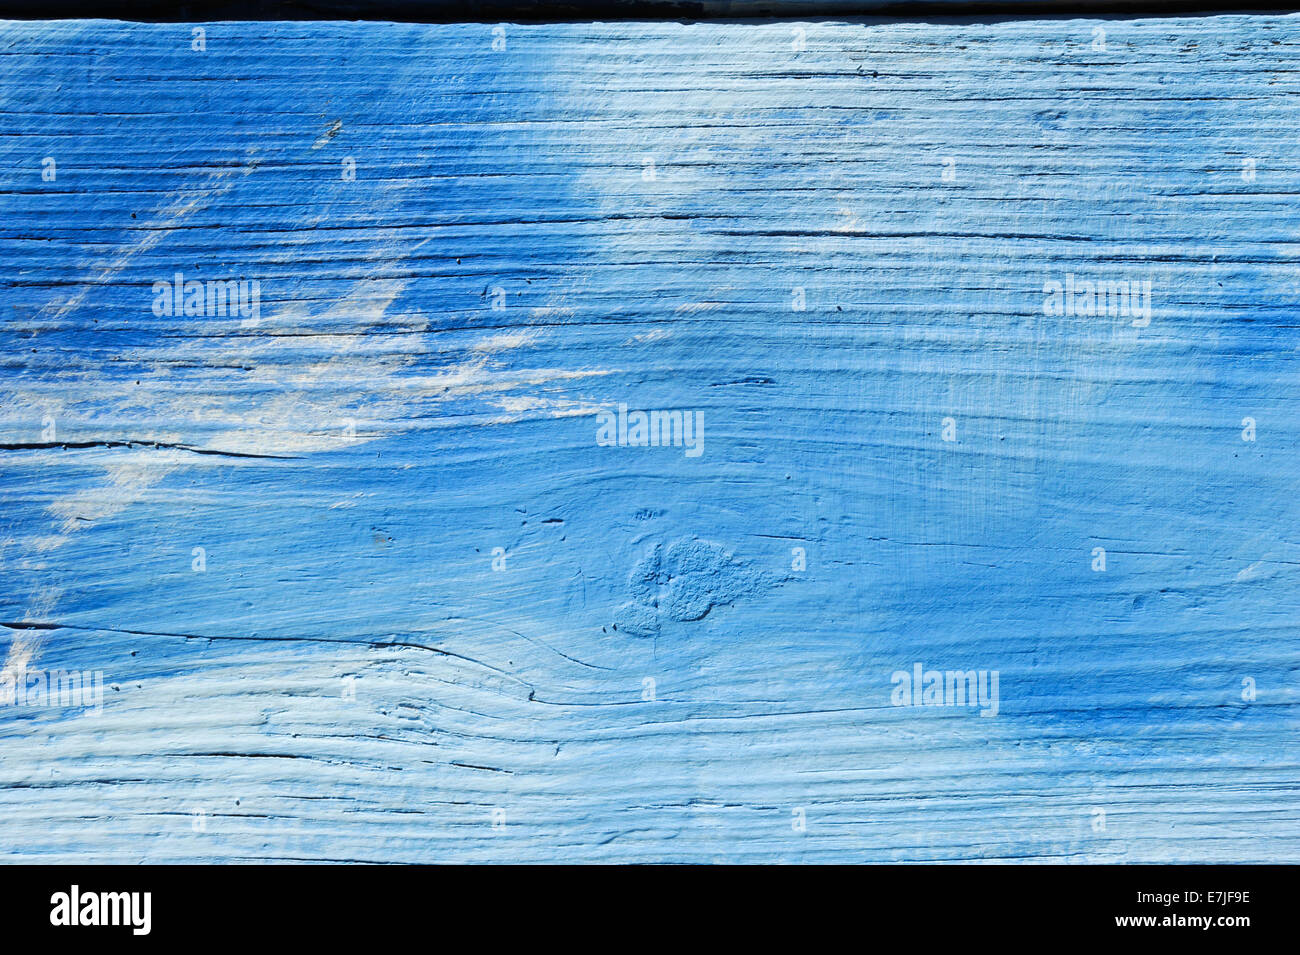 background, blue, board, close-up, cutting, diagonal, blue, old, painted, pattern, scratch, texture, weathered, wood Stock Photo